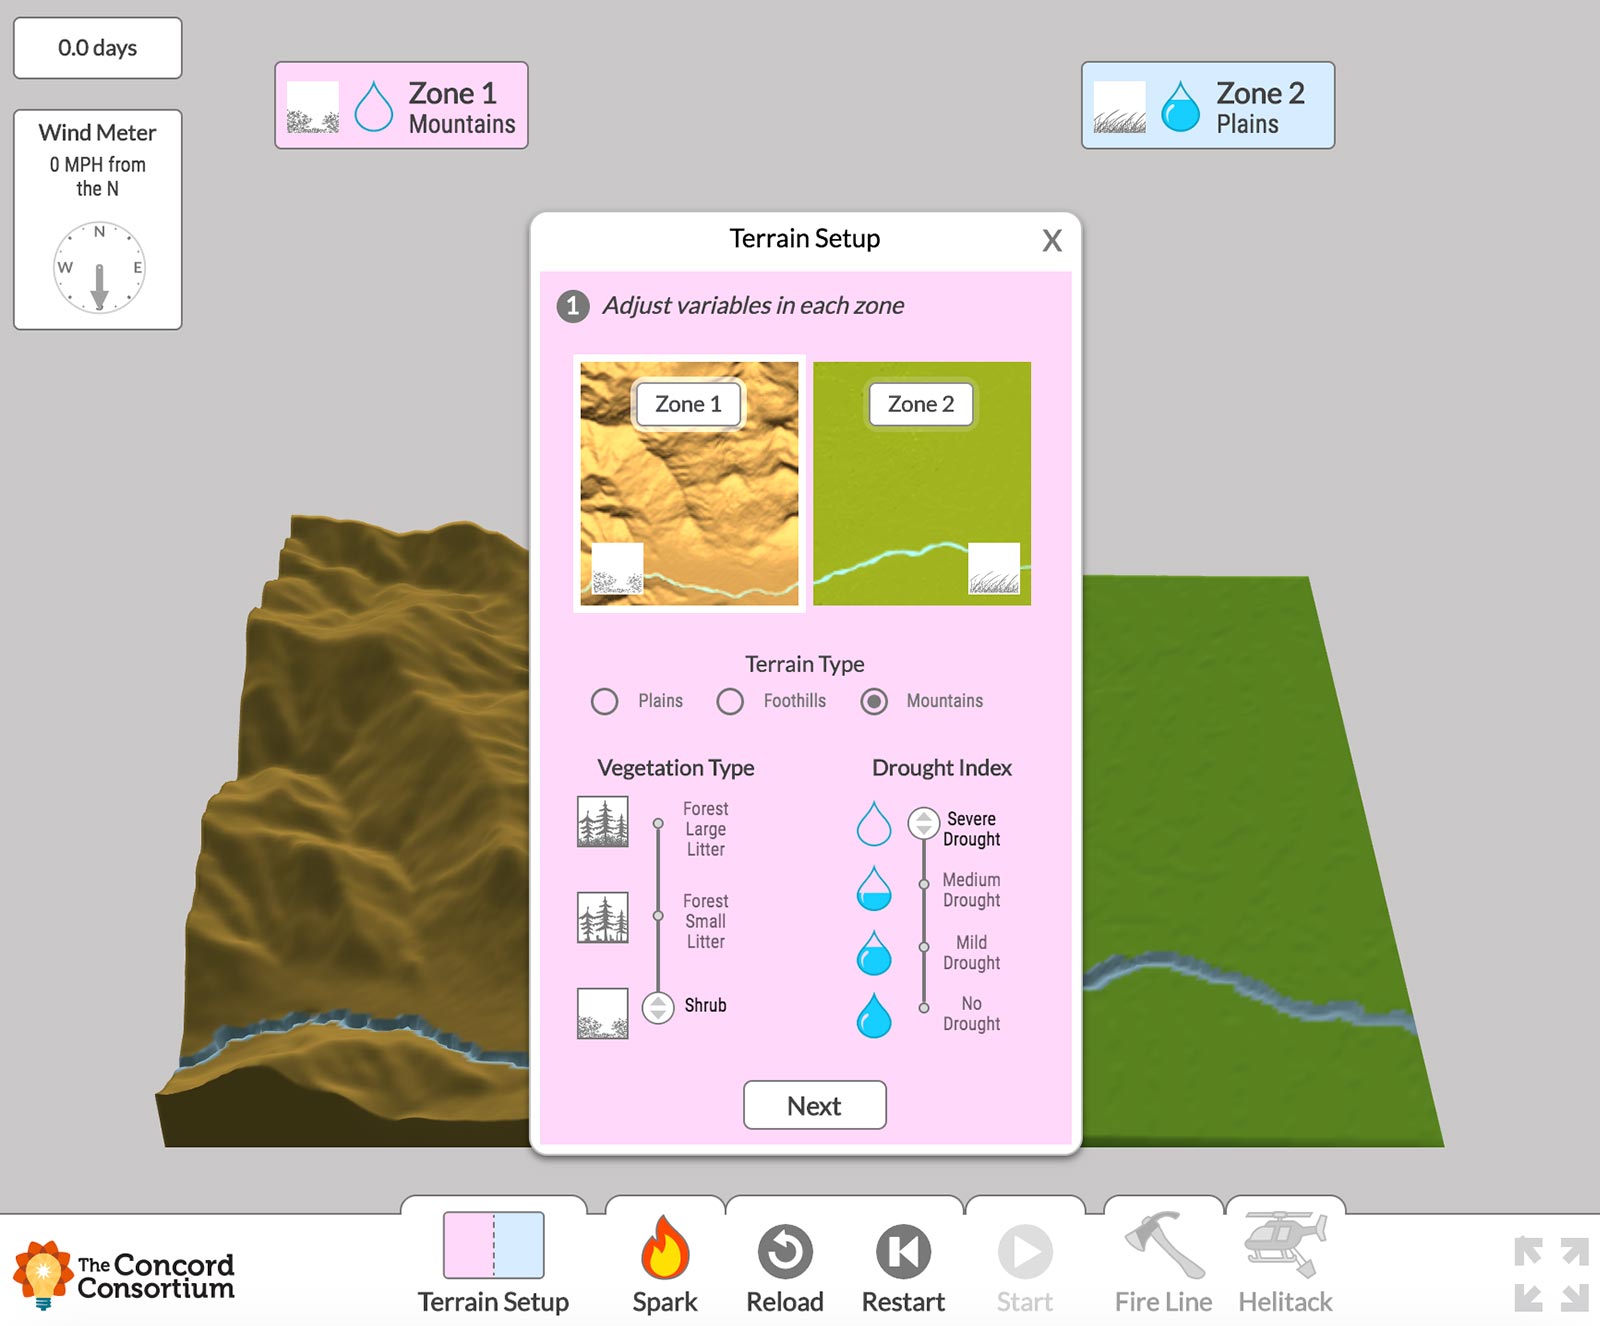 In the Terrain Setup window, students change input parameters of the Wildfire Explorer model to observe how each variable influences wildfire spread.